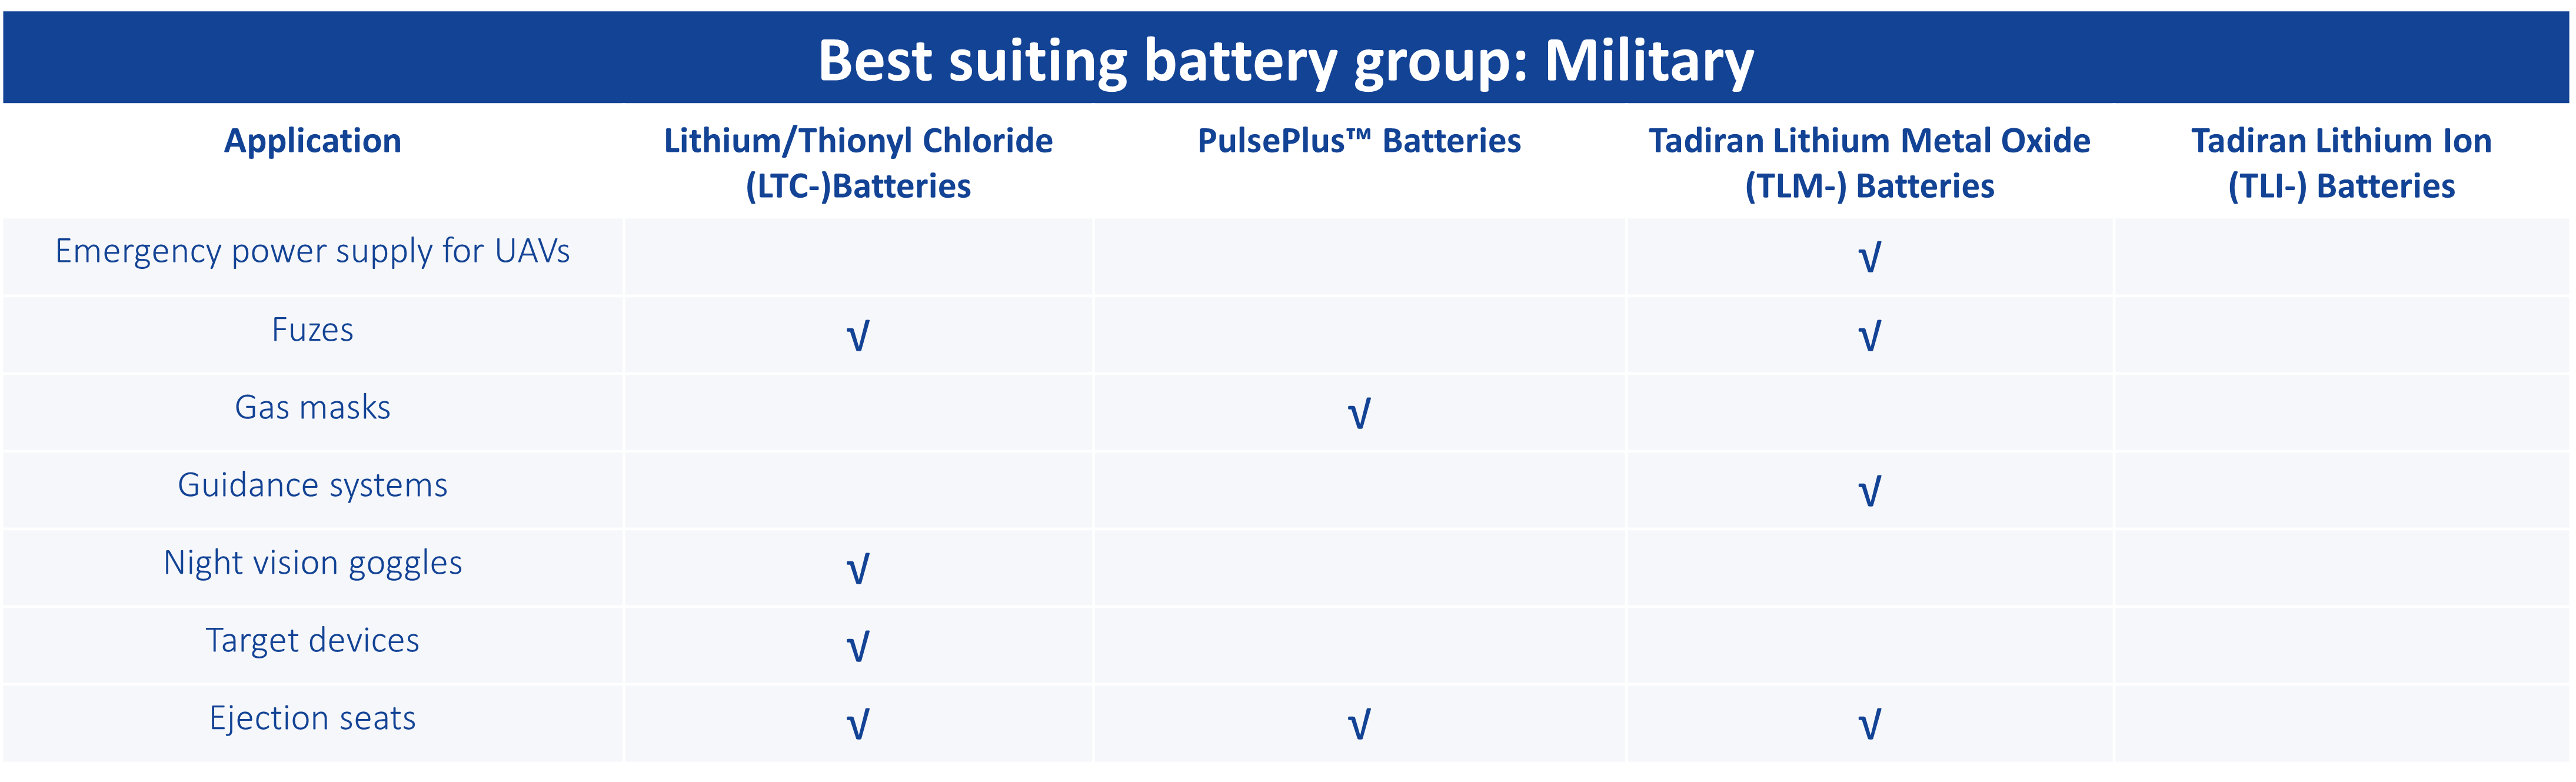 Batteries for Military Applications